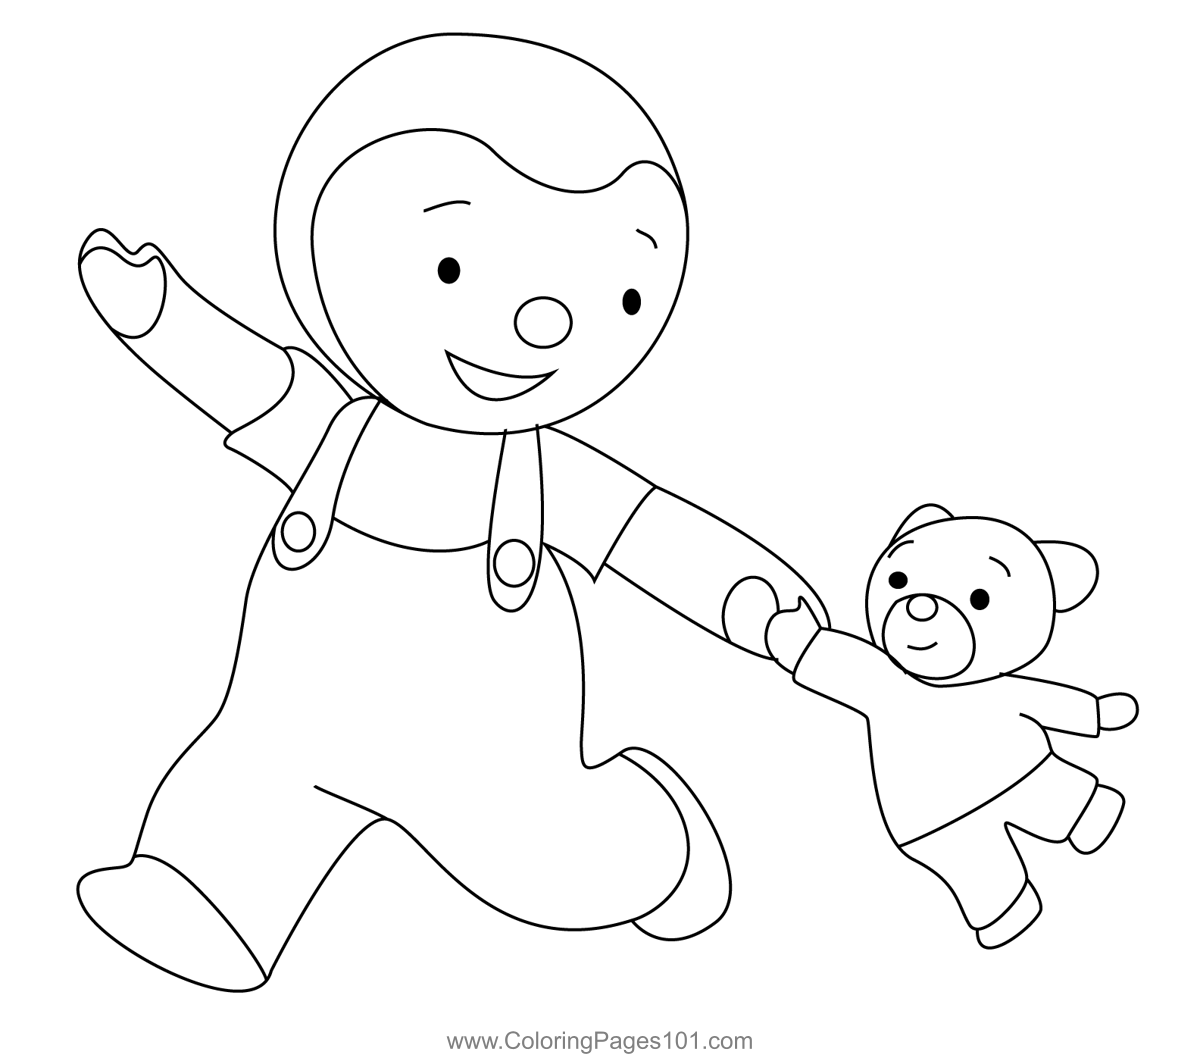 Charley Walking With Mimmo Coloring Page for Kids - Free Charley and ...